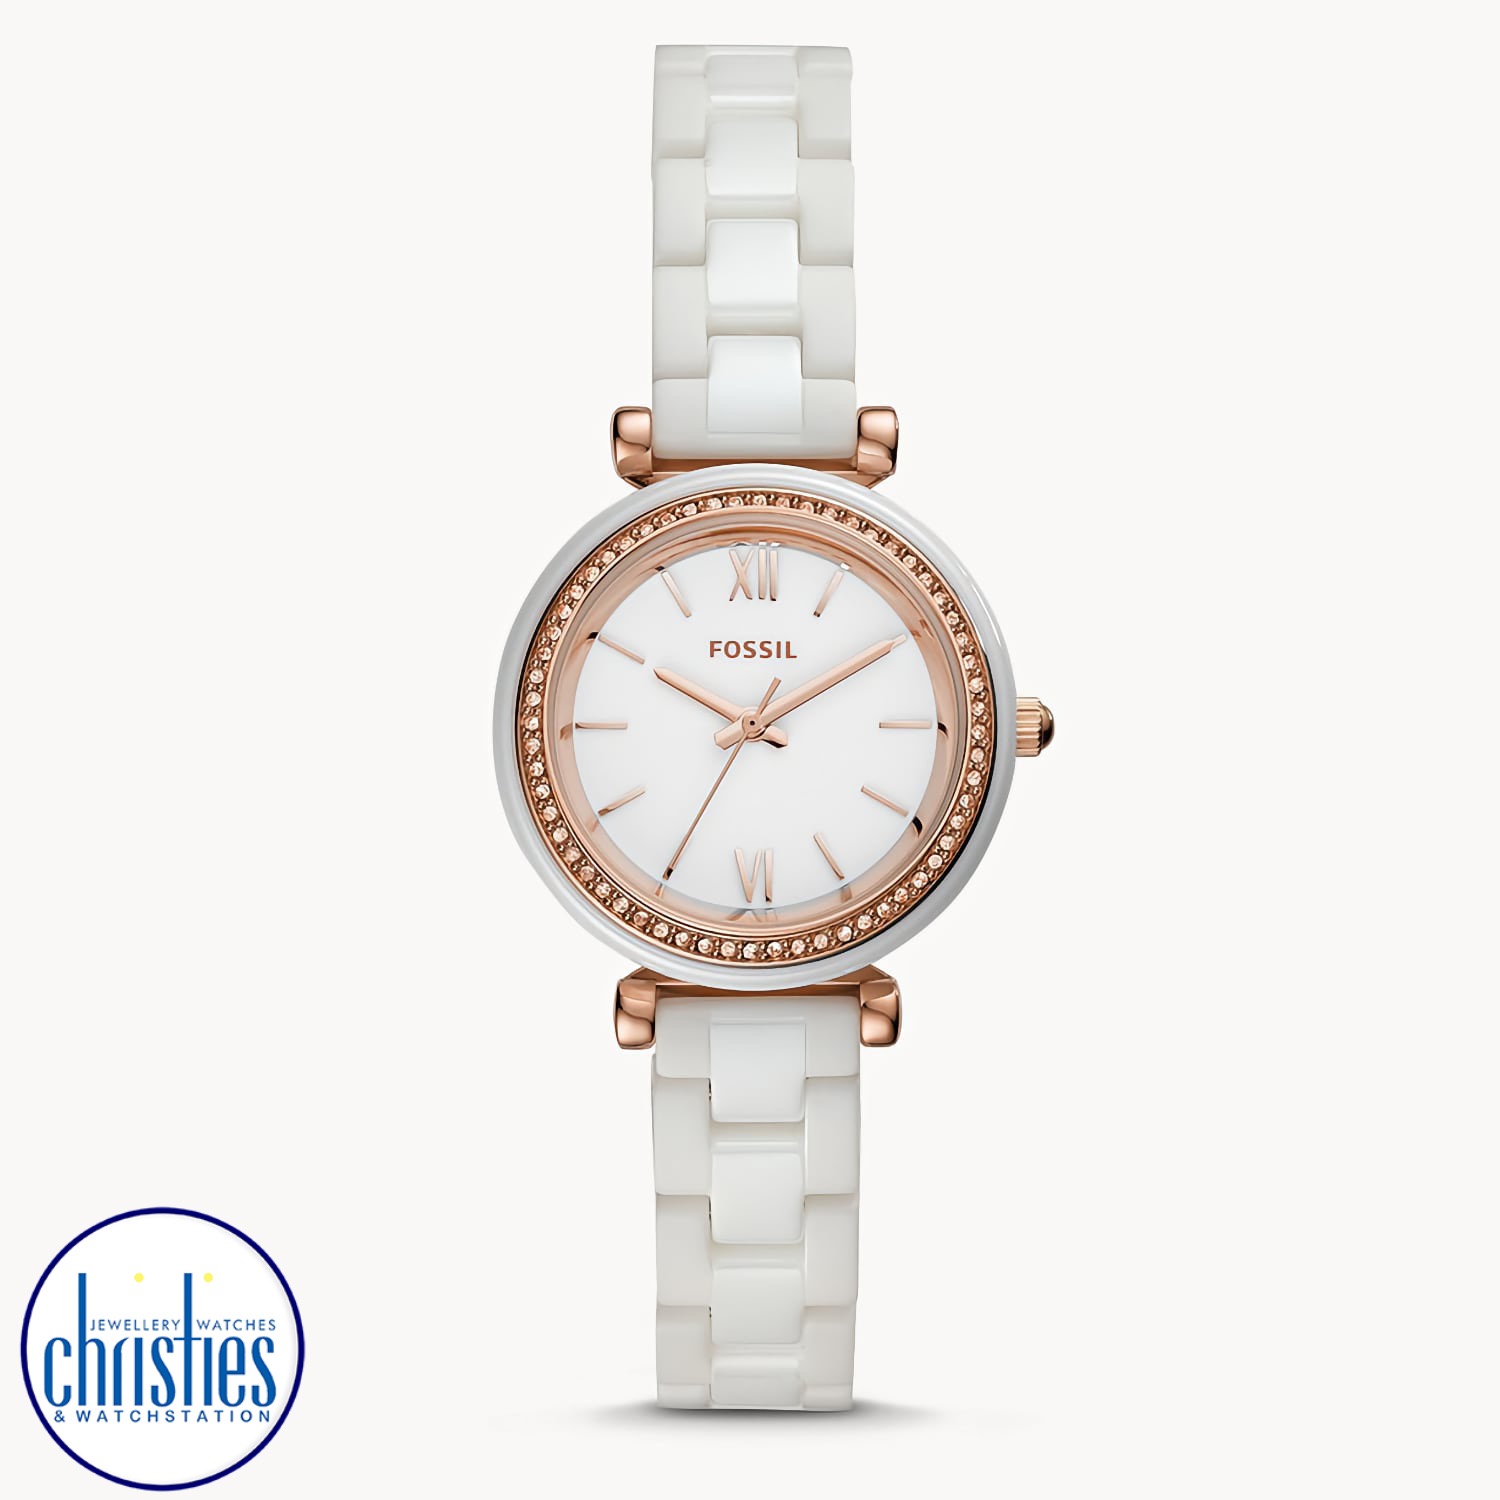 CE1104 Fossil Carlie Mini Three-Hand White Ceramic Watch. CE1104 Fossil Carlie Mini Three-Hand White Ceramic Watch Afterpay - Split your purchase into 4 instalments - Pay for your purchase over 4 instalments, due every two weeks. You’ll pay your first ins